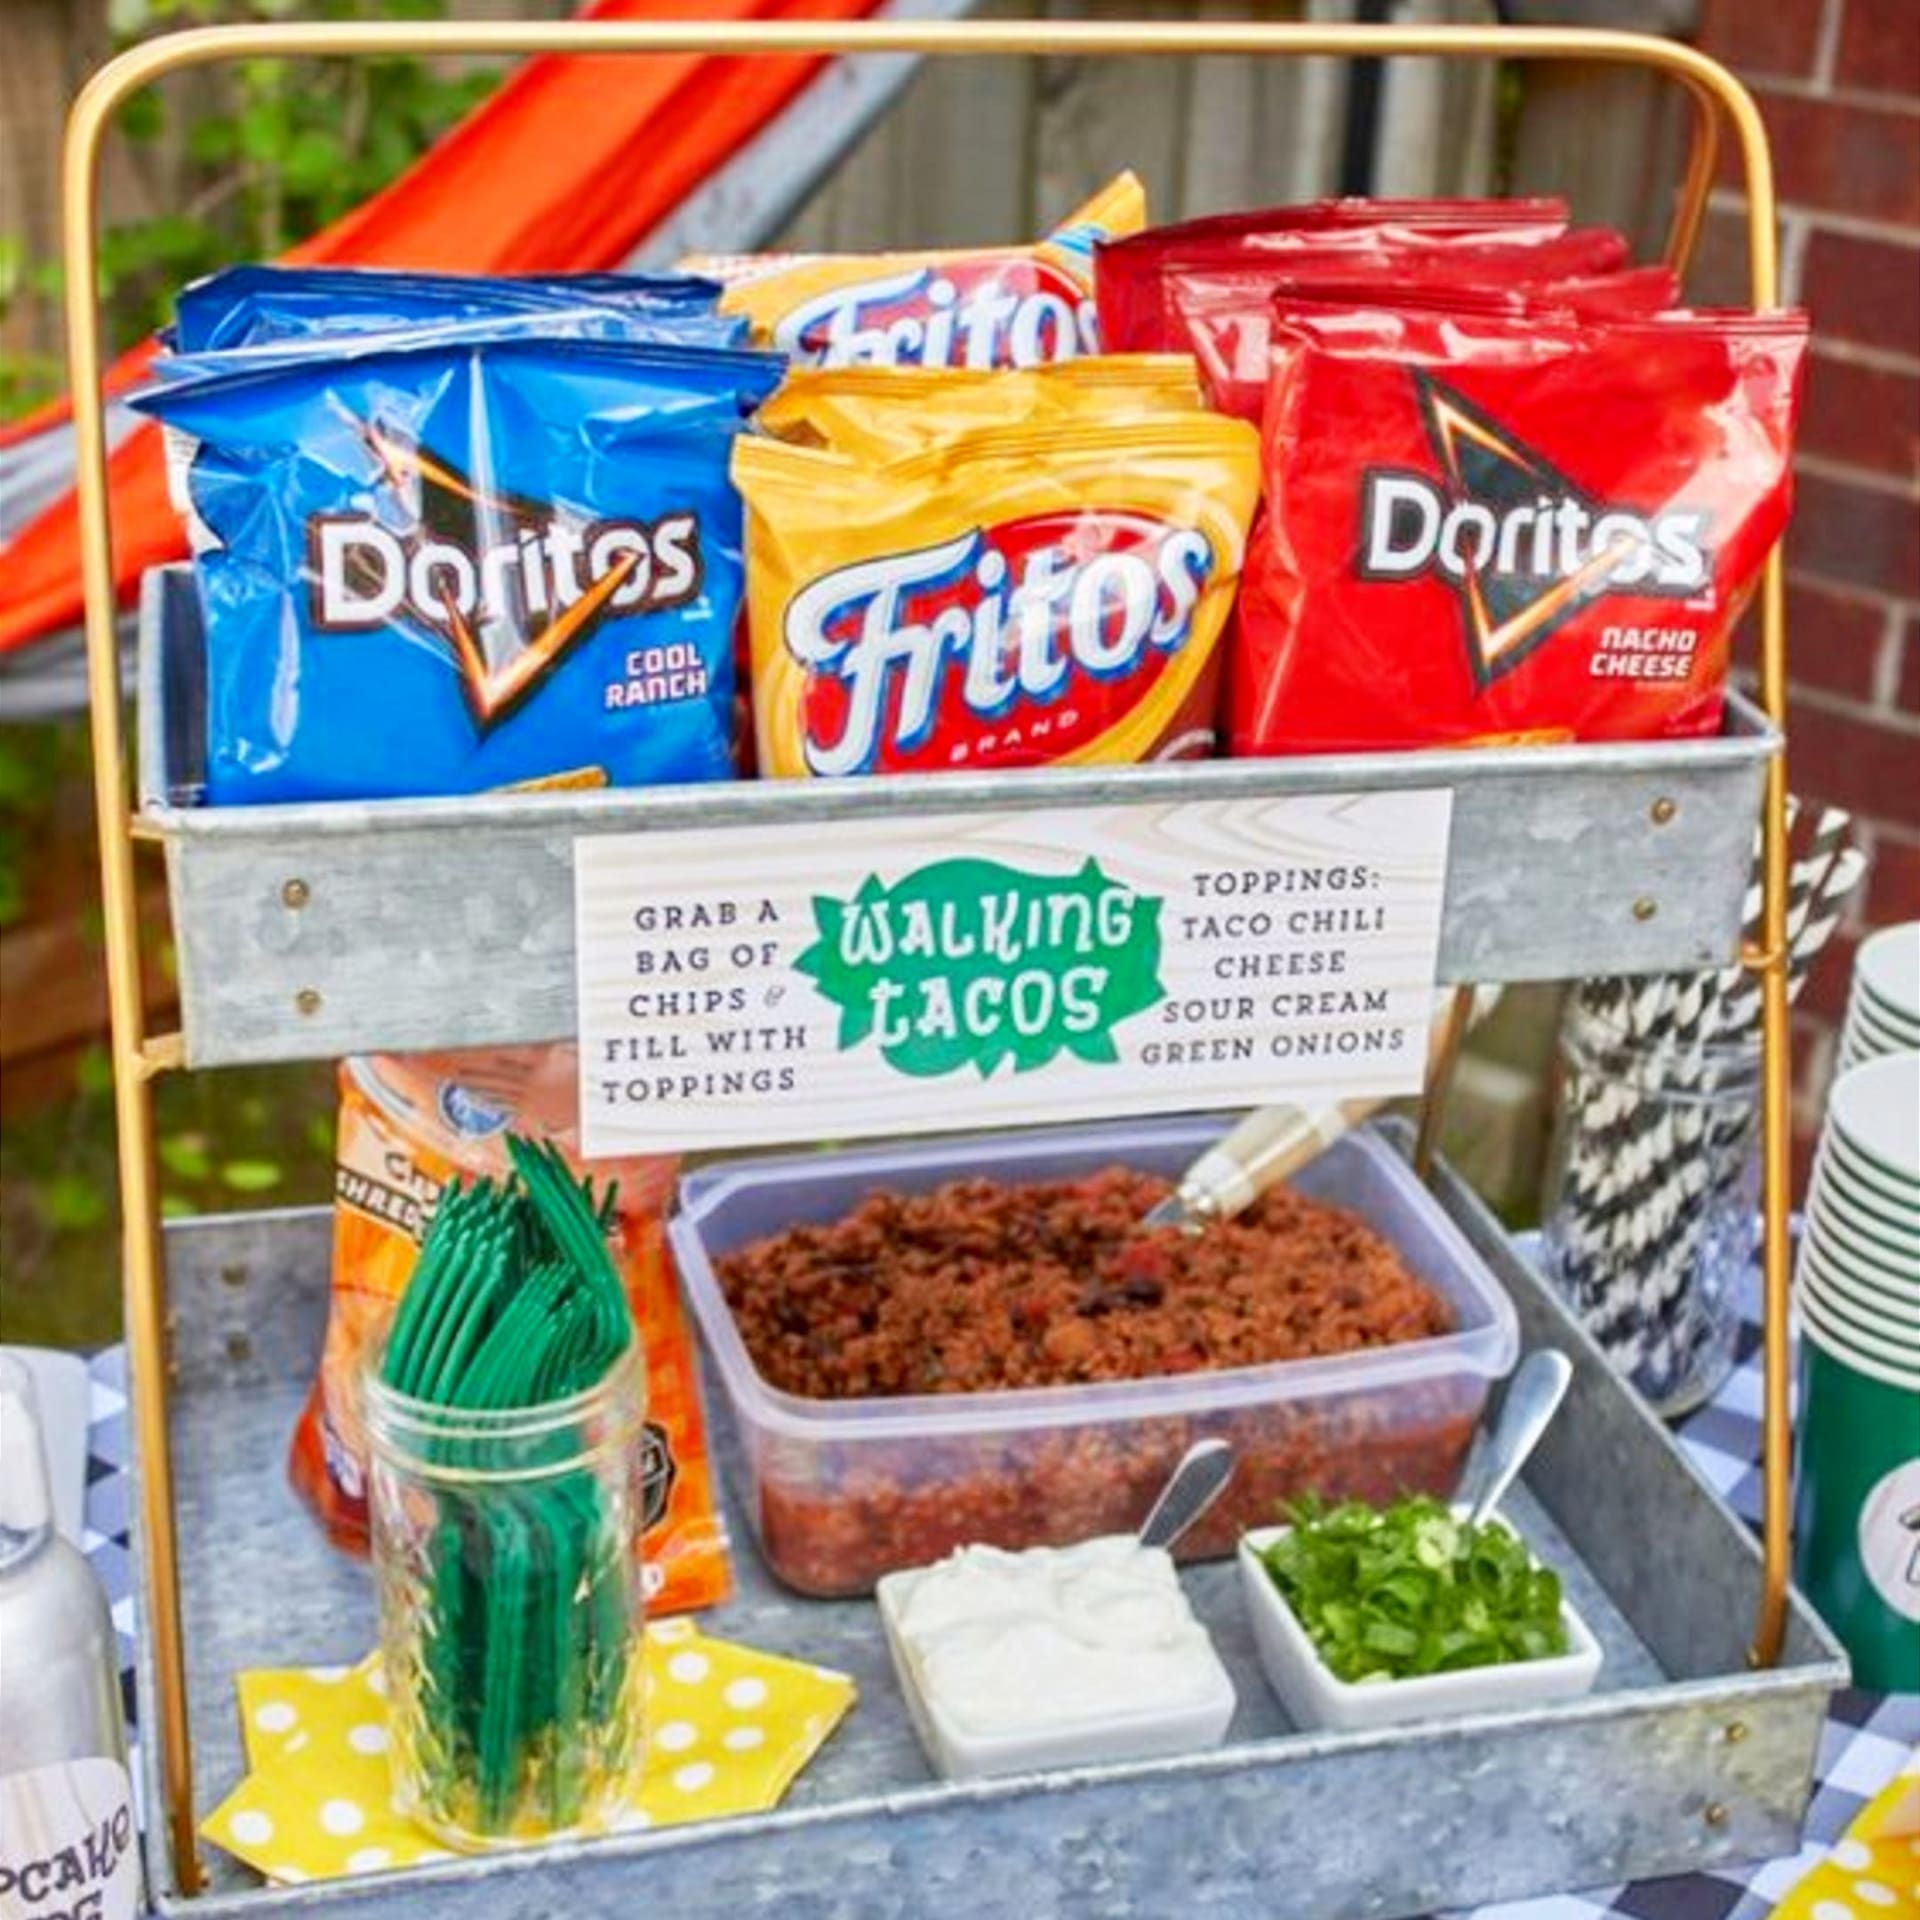 Easy party food ideas for a crowd - BBQ cookout, backyard party, block party or ANY party where you need to please a crowd